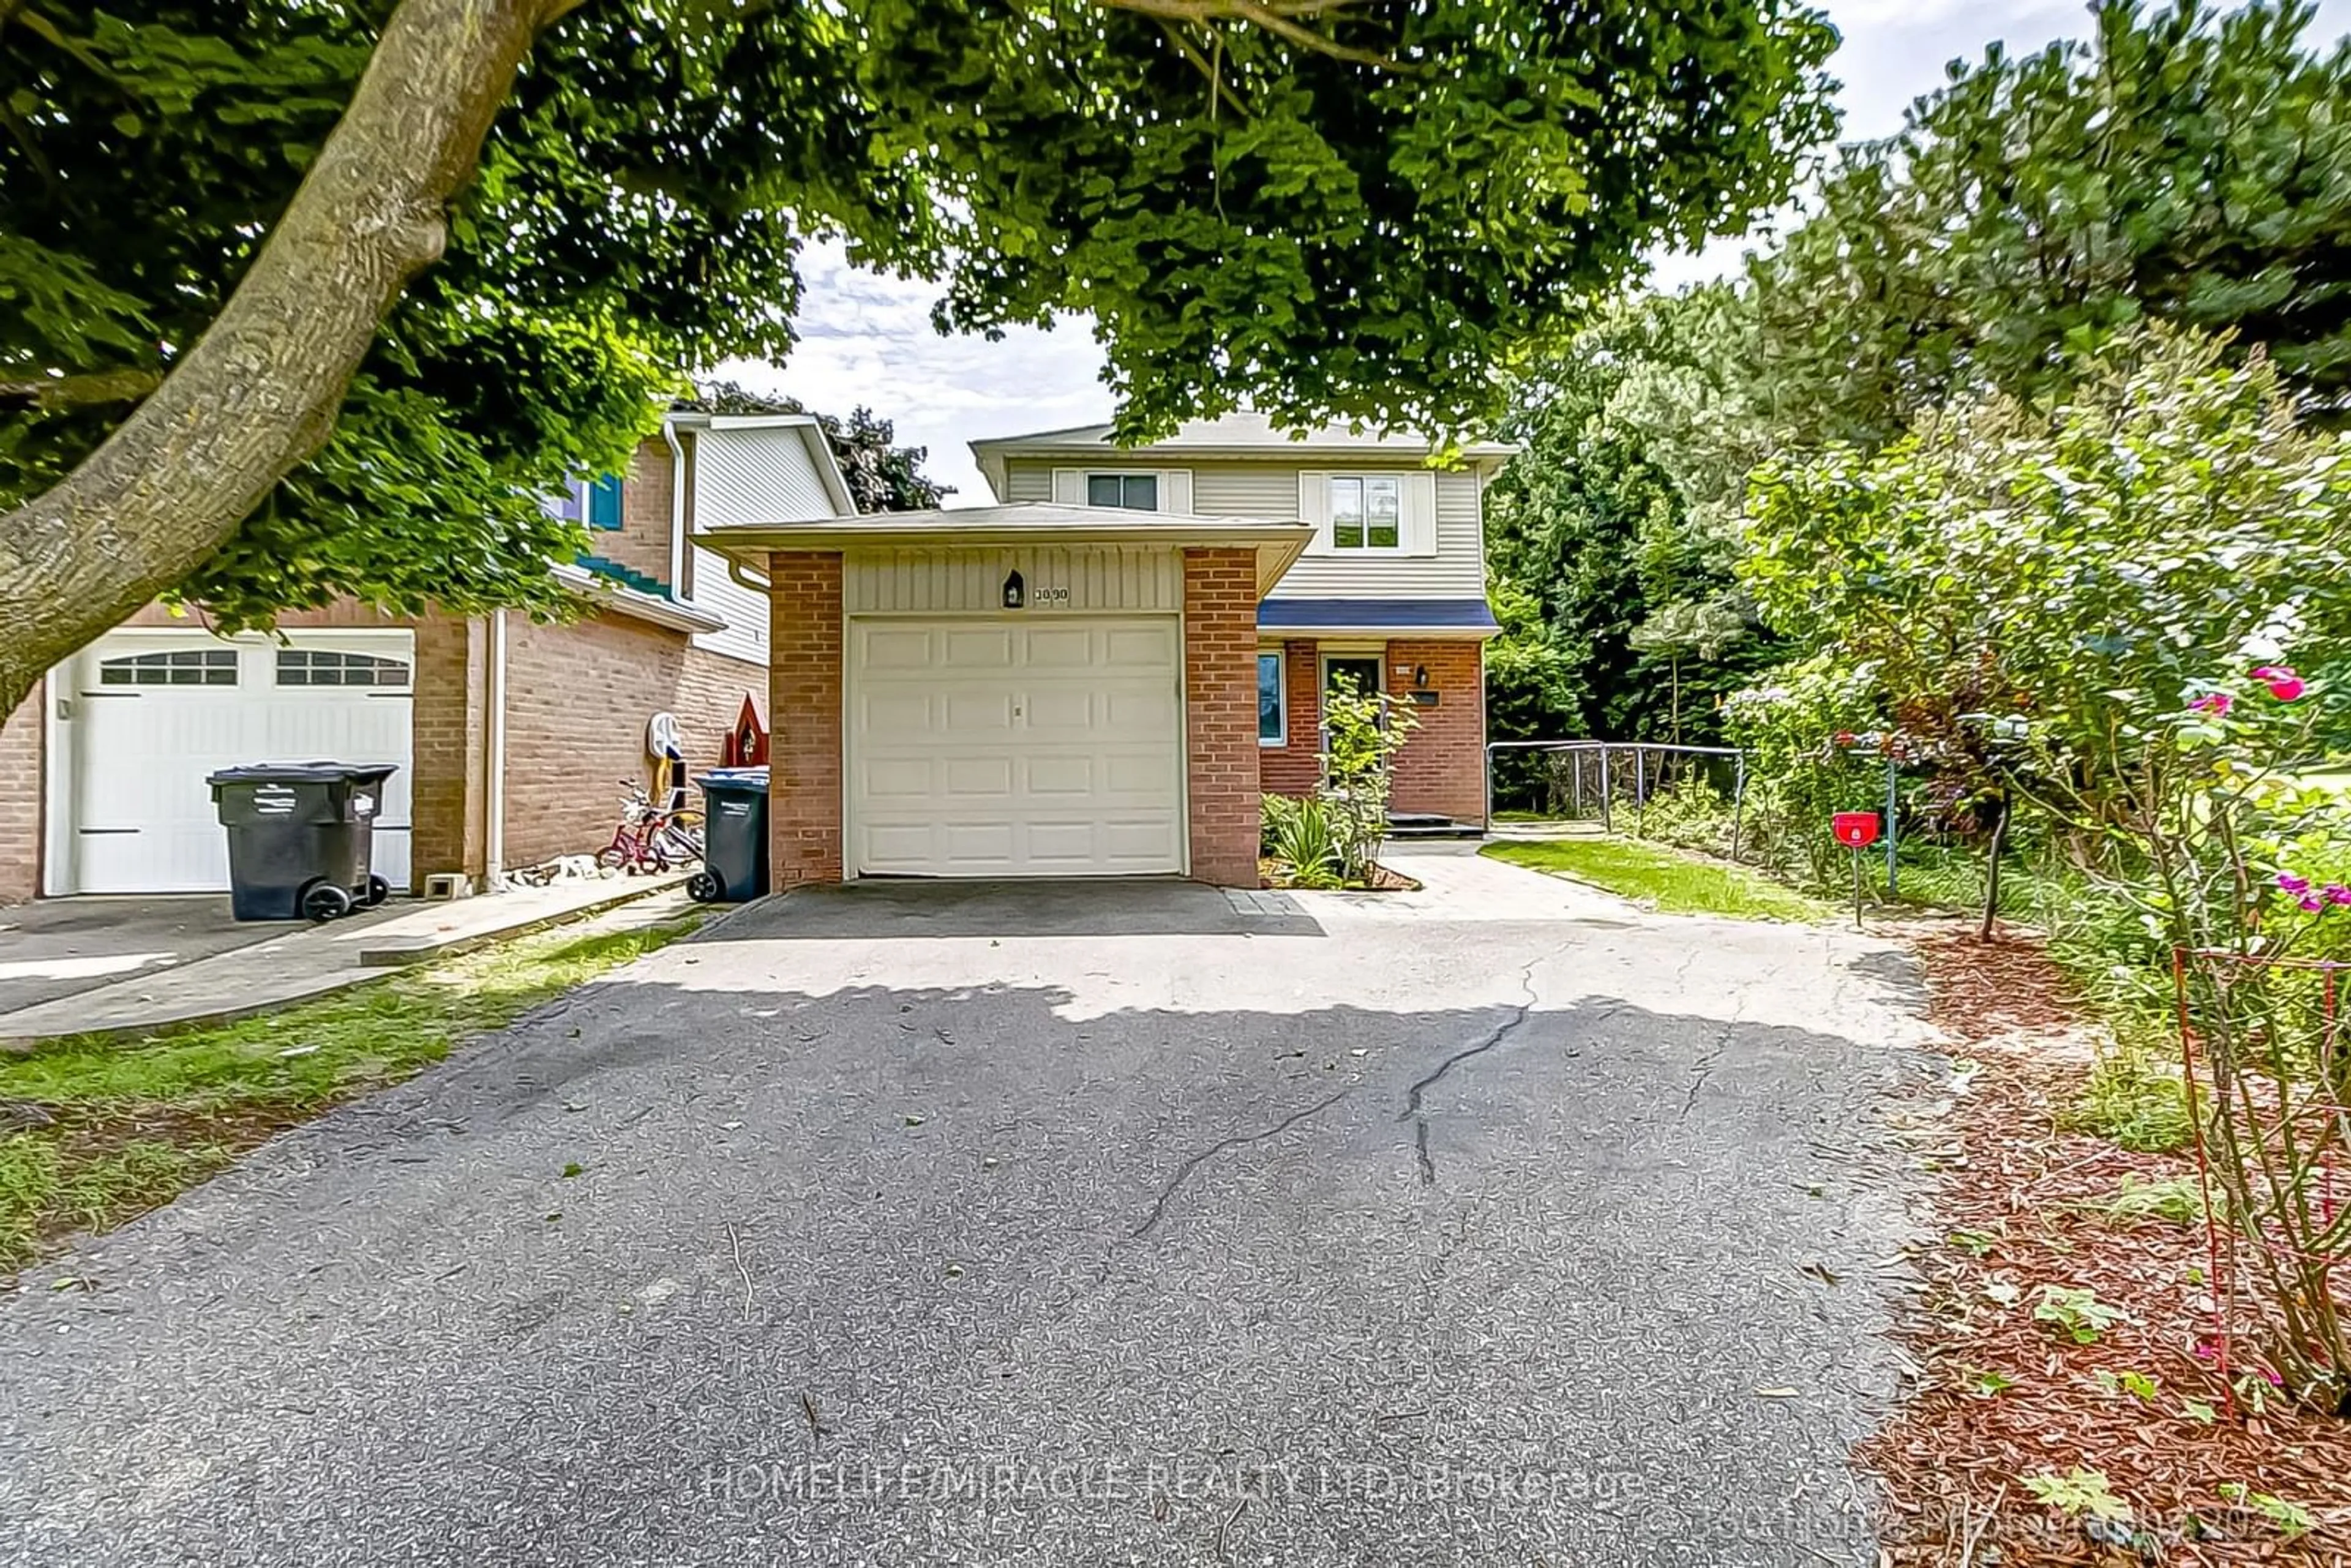 Street view for 3090 Patrick Cres, Mississauga Ontario L5N 3G5